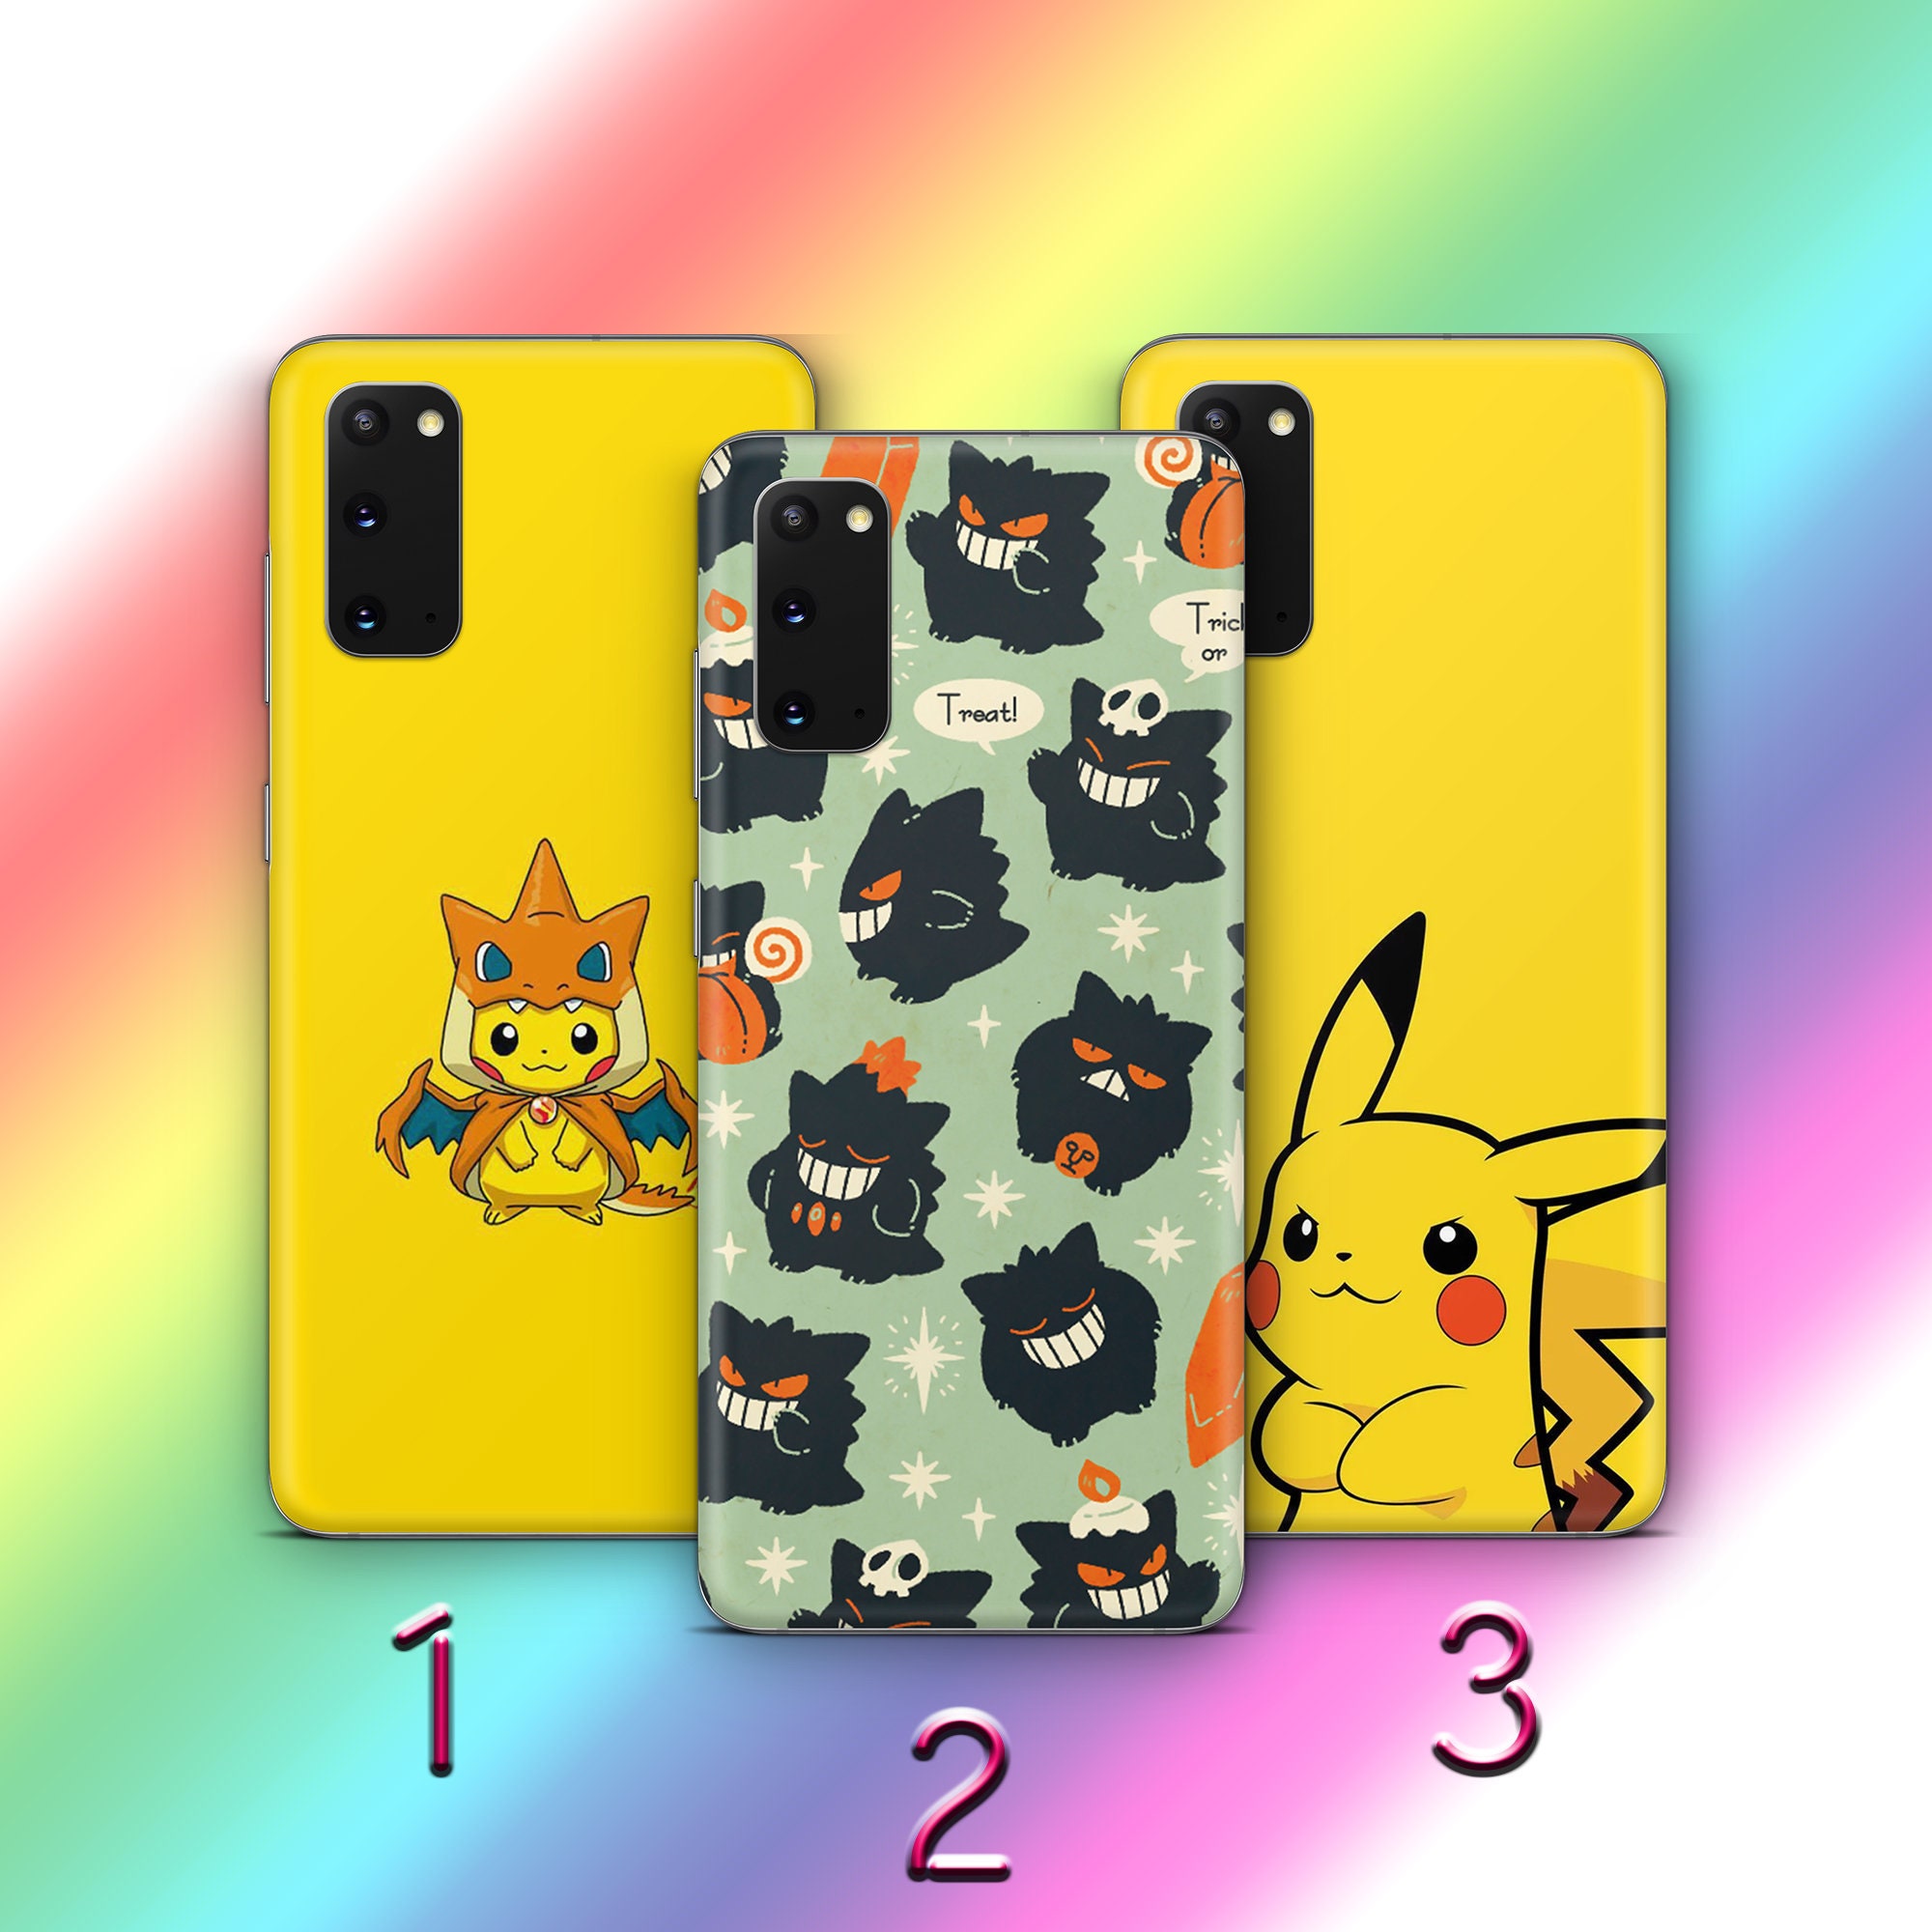 Pikachu 4 Phone Case Cover For MANY VARIOUS Samsung Galaxy Models Animation  Characters Japanese Cartoon Action Fighters Popular